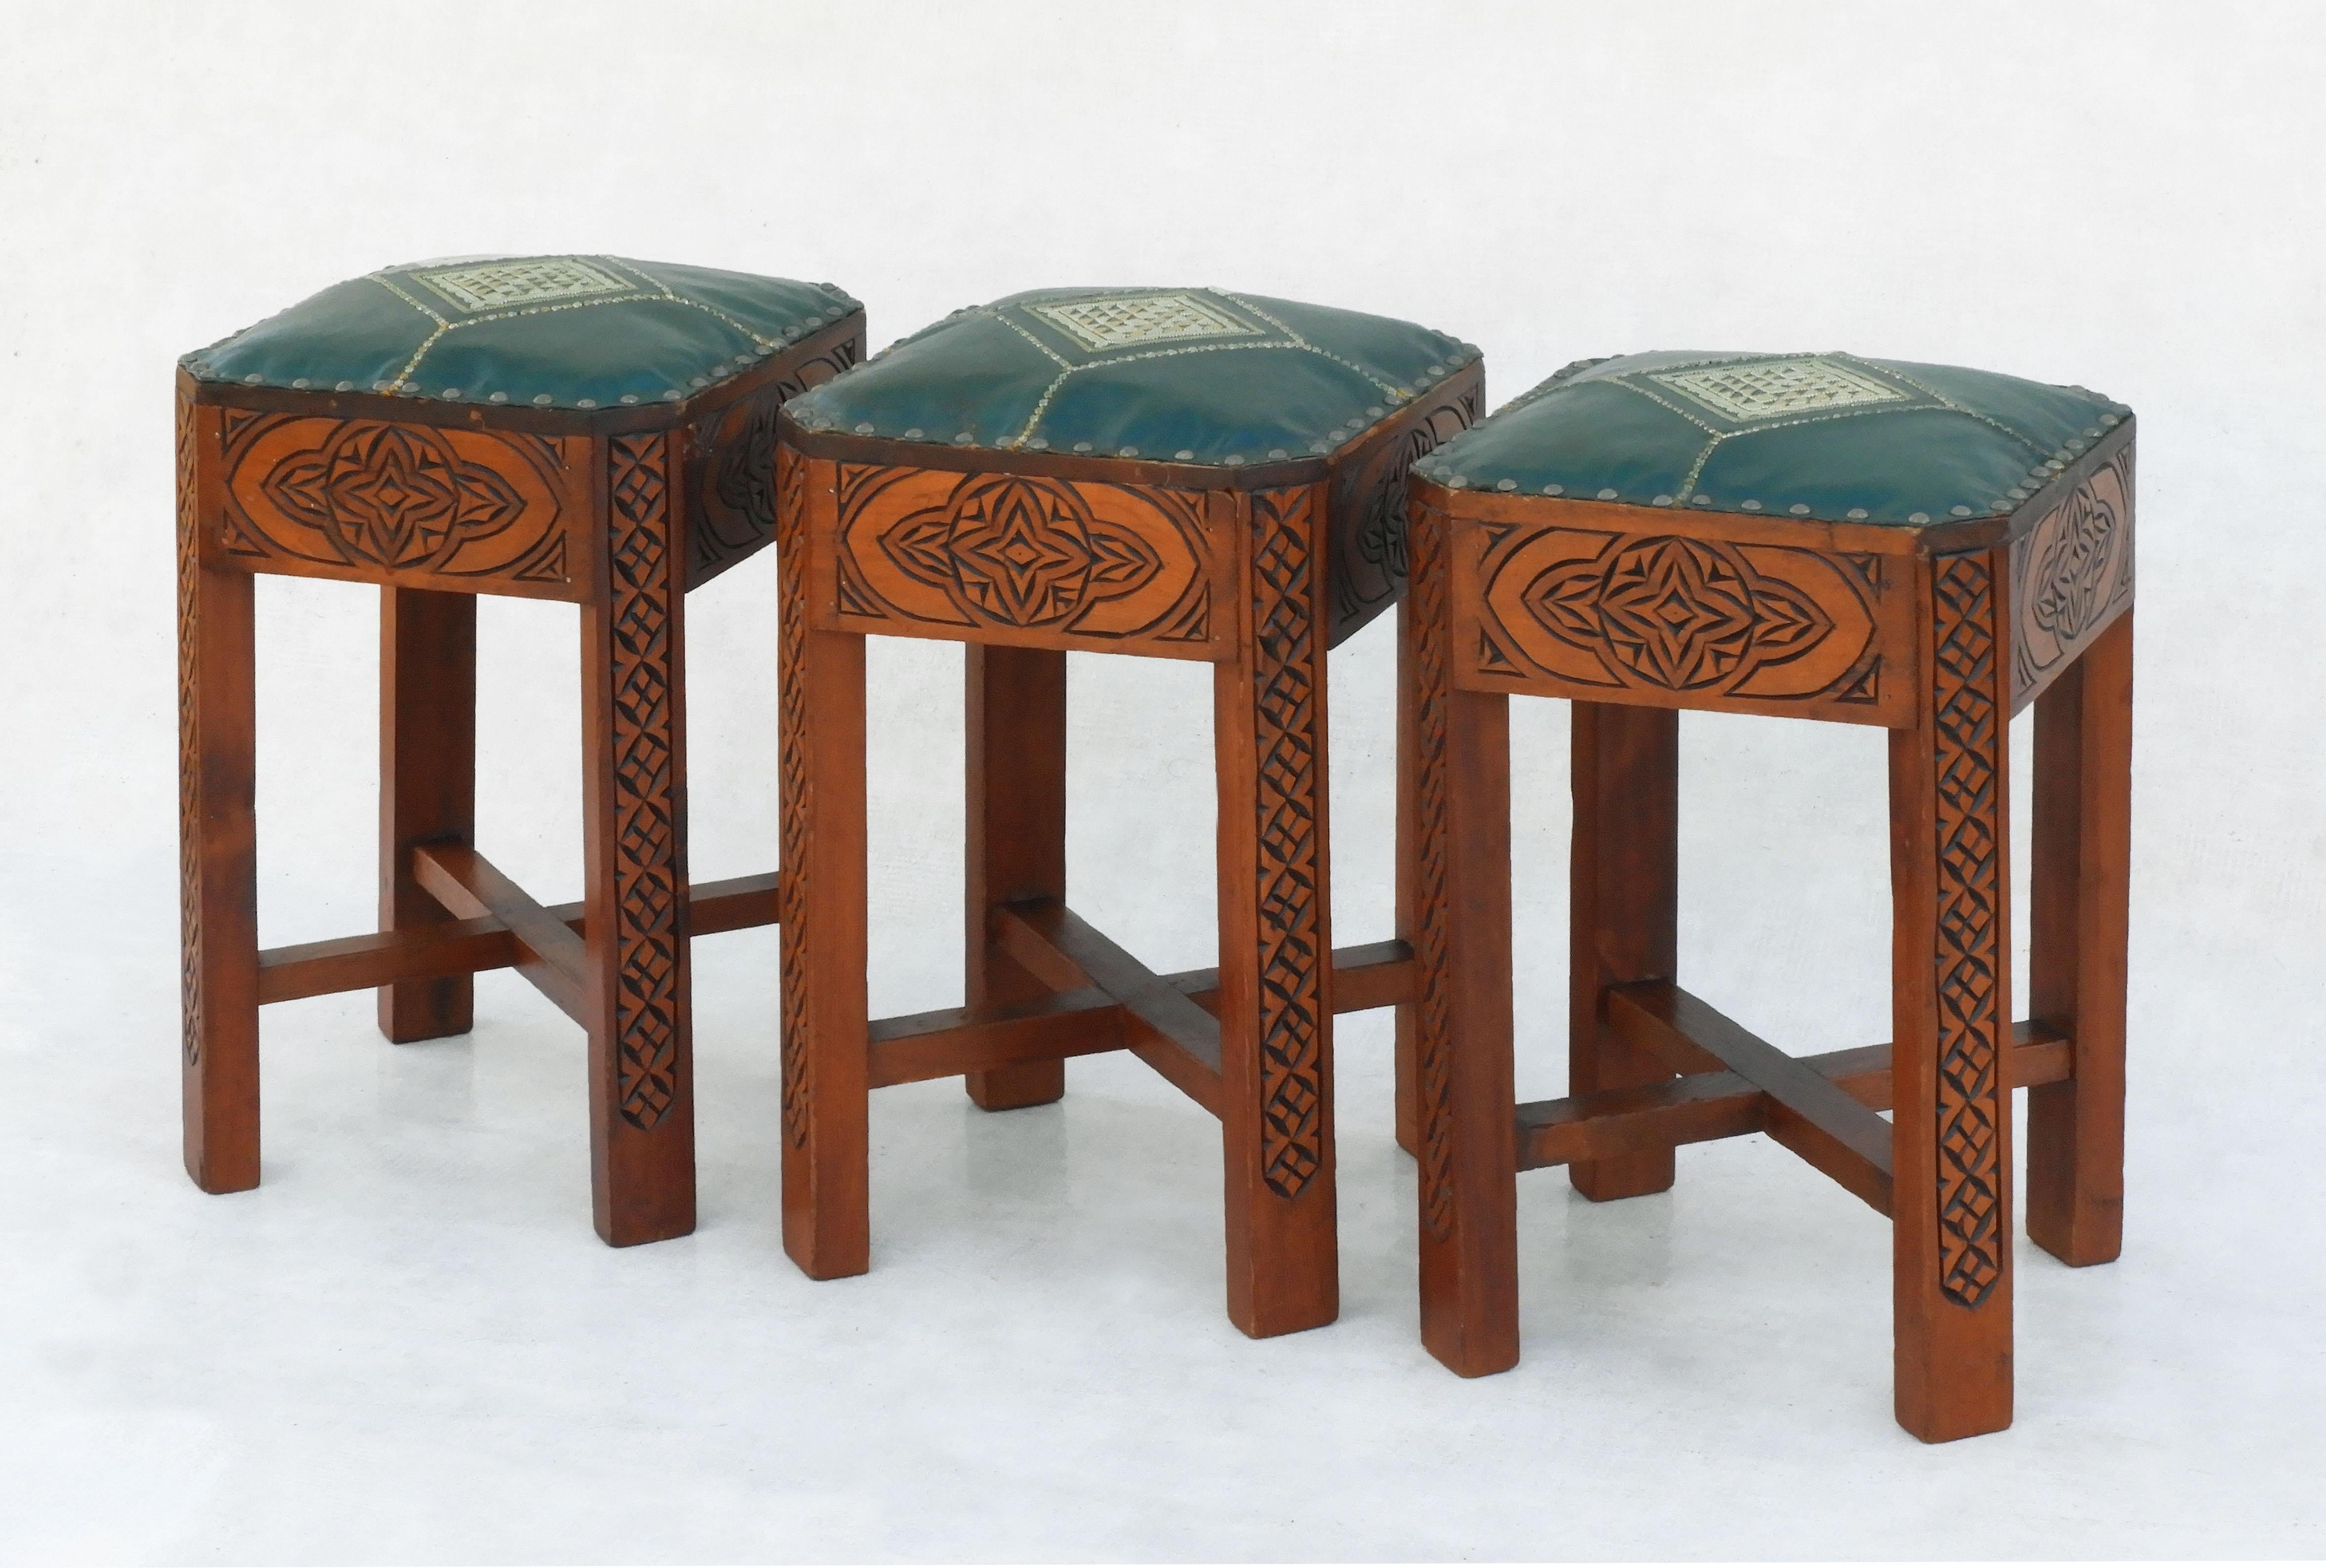 Unusual Moorish style tabouret stools C 1950s Morocco.  Hand-embroidered green leather upholstery, metal stud work and hand-carved decorative wood. In good vintage condition for their age, solid and sound with good patina.
Dimensions: Height: 46.5cm